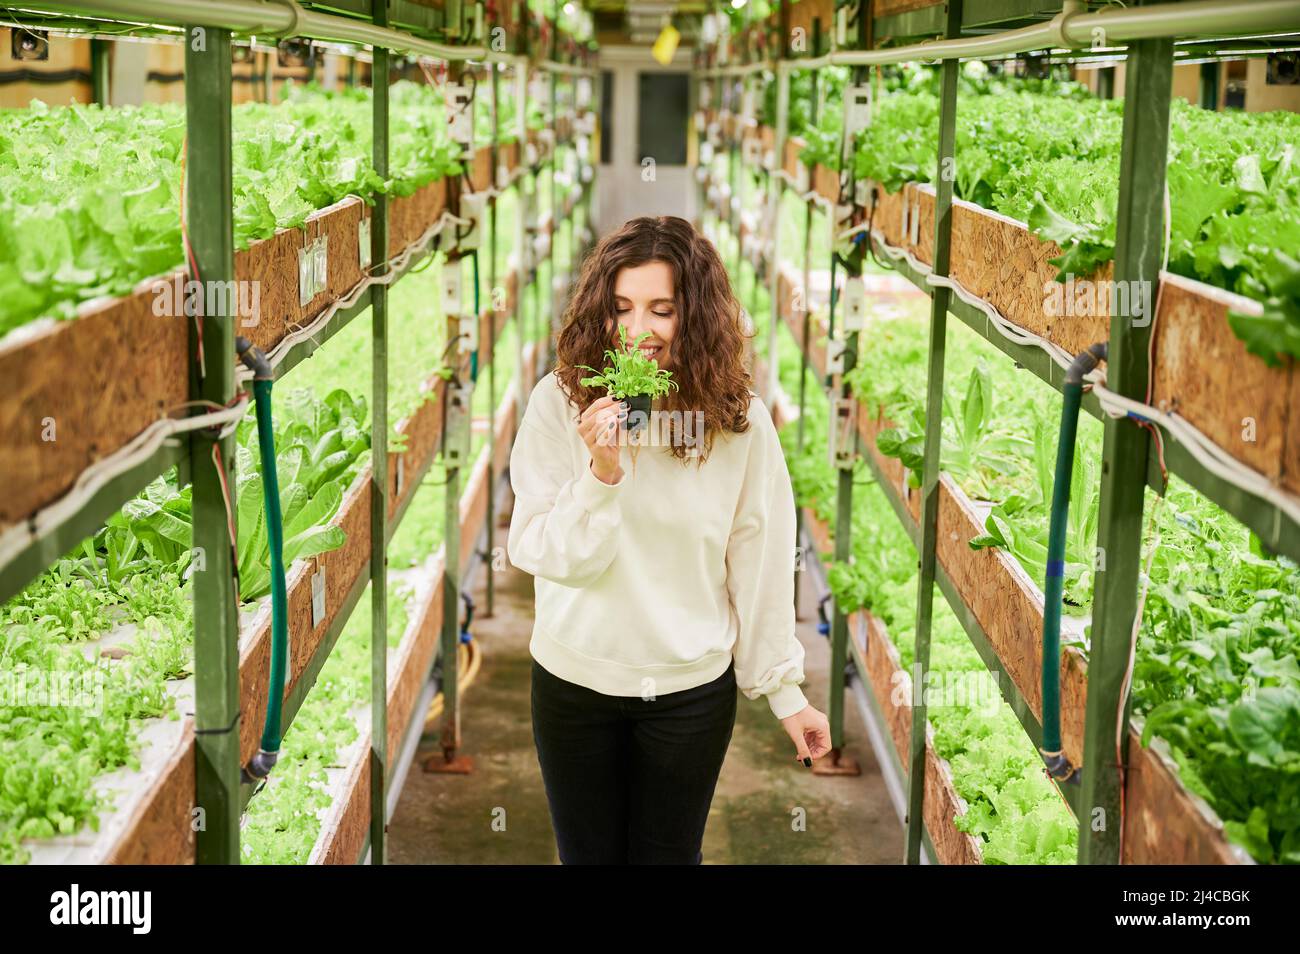 Smiling female person enjoying scent of fresh leafy greens in greenhouse. Woman holding pot with green leafy plant and smelling aromatic leaf while standing in aisle between shelves with plants. Stock Photo